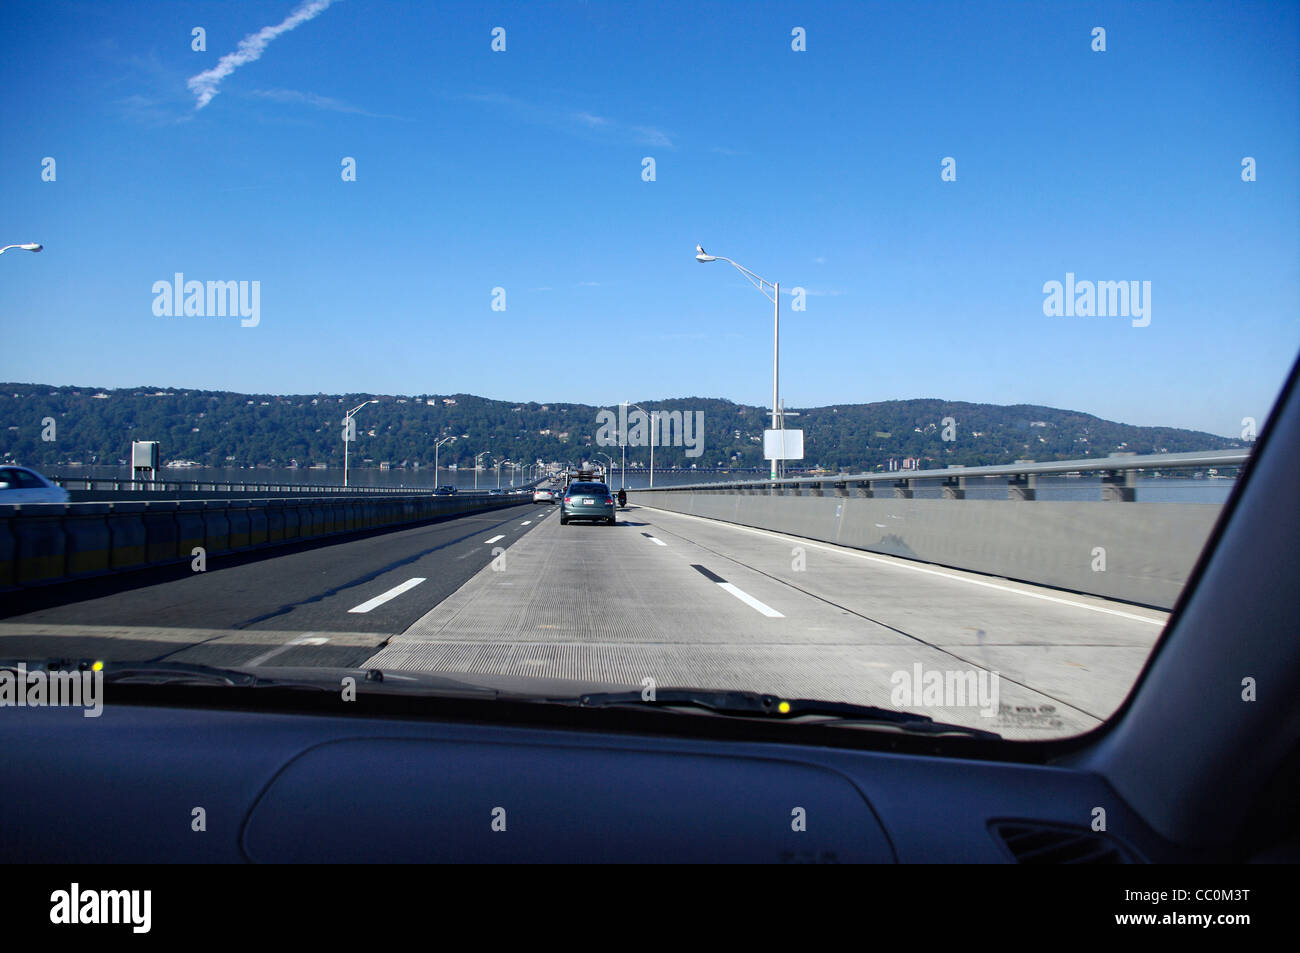 Going West on the Tappan Zee bridge New York State Thruway Highway 87 and 287 across the Hudson River. Stock Photo